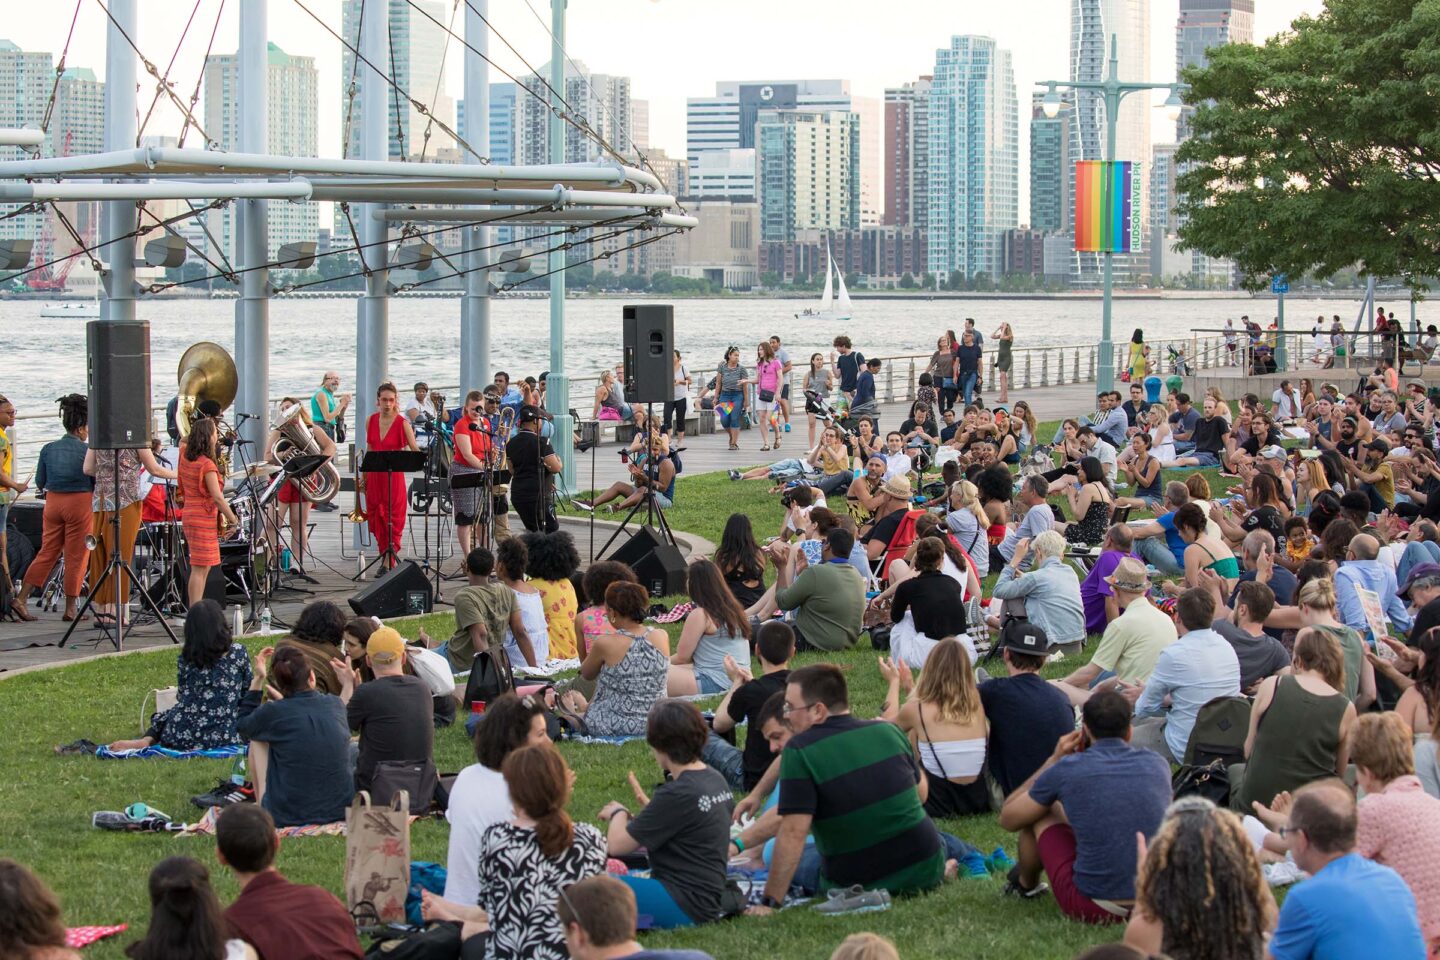 A group of music fans sit on Pier 45 listening to music as the sun sets